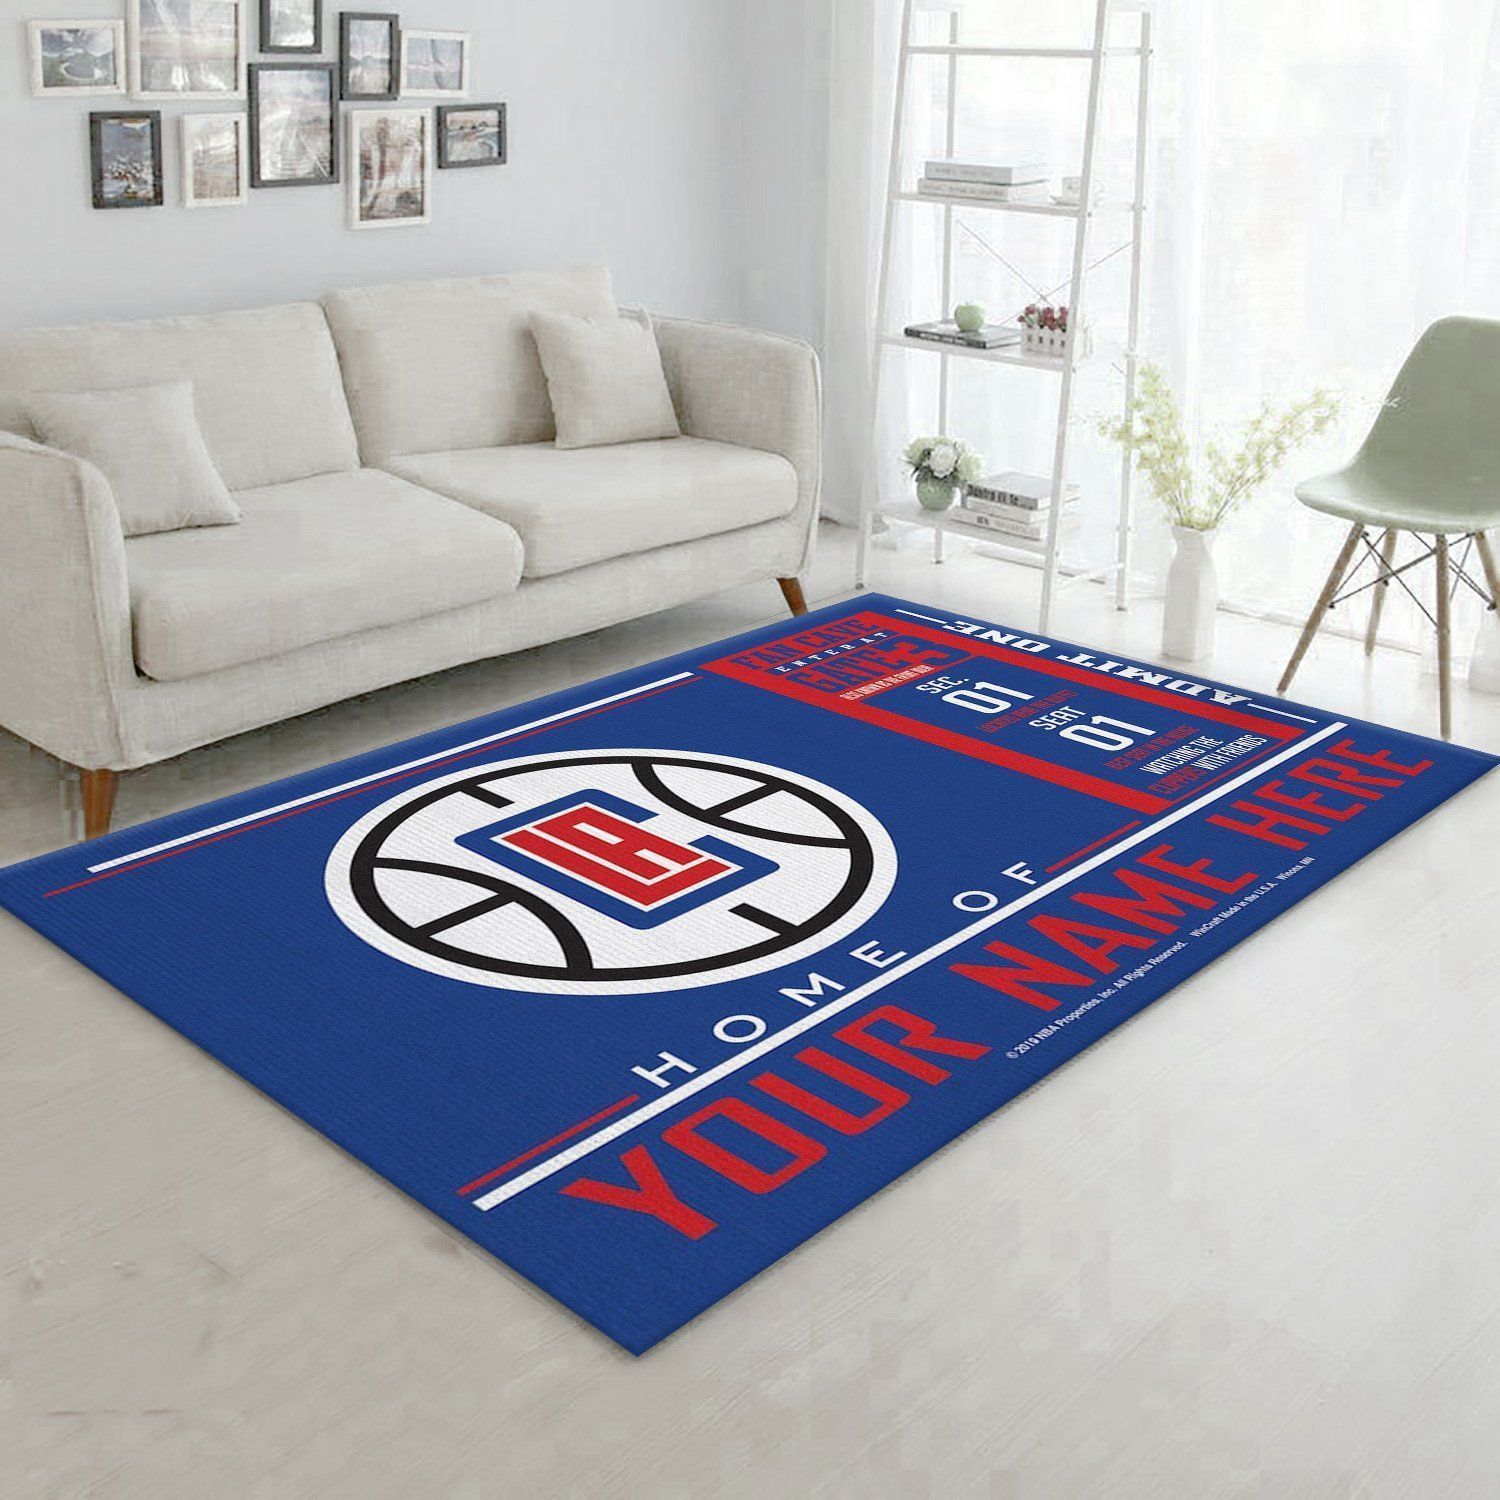 Customizable La Clippers Wincraft Personalized NBA Area Rug Bedroom Rug US Gift Decor - Indoor Outdoor Rugs